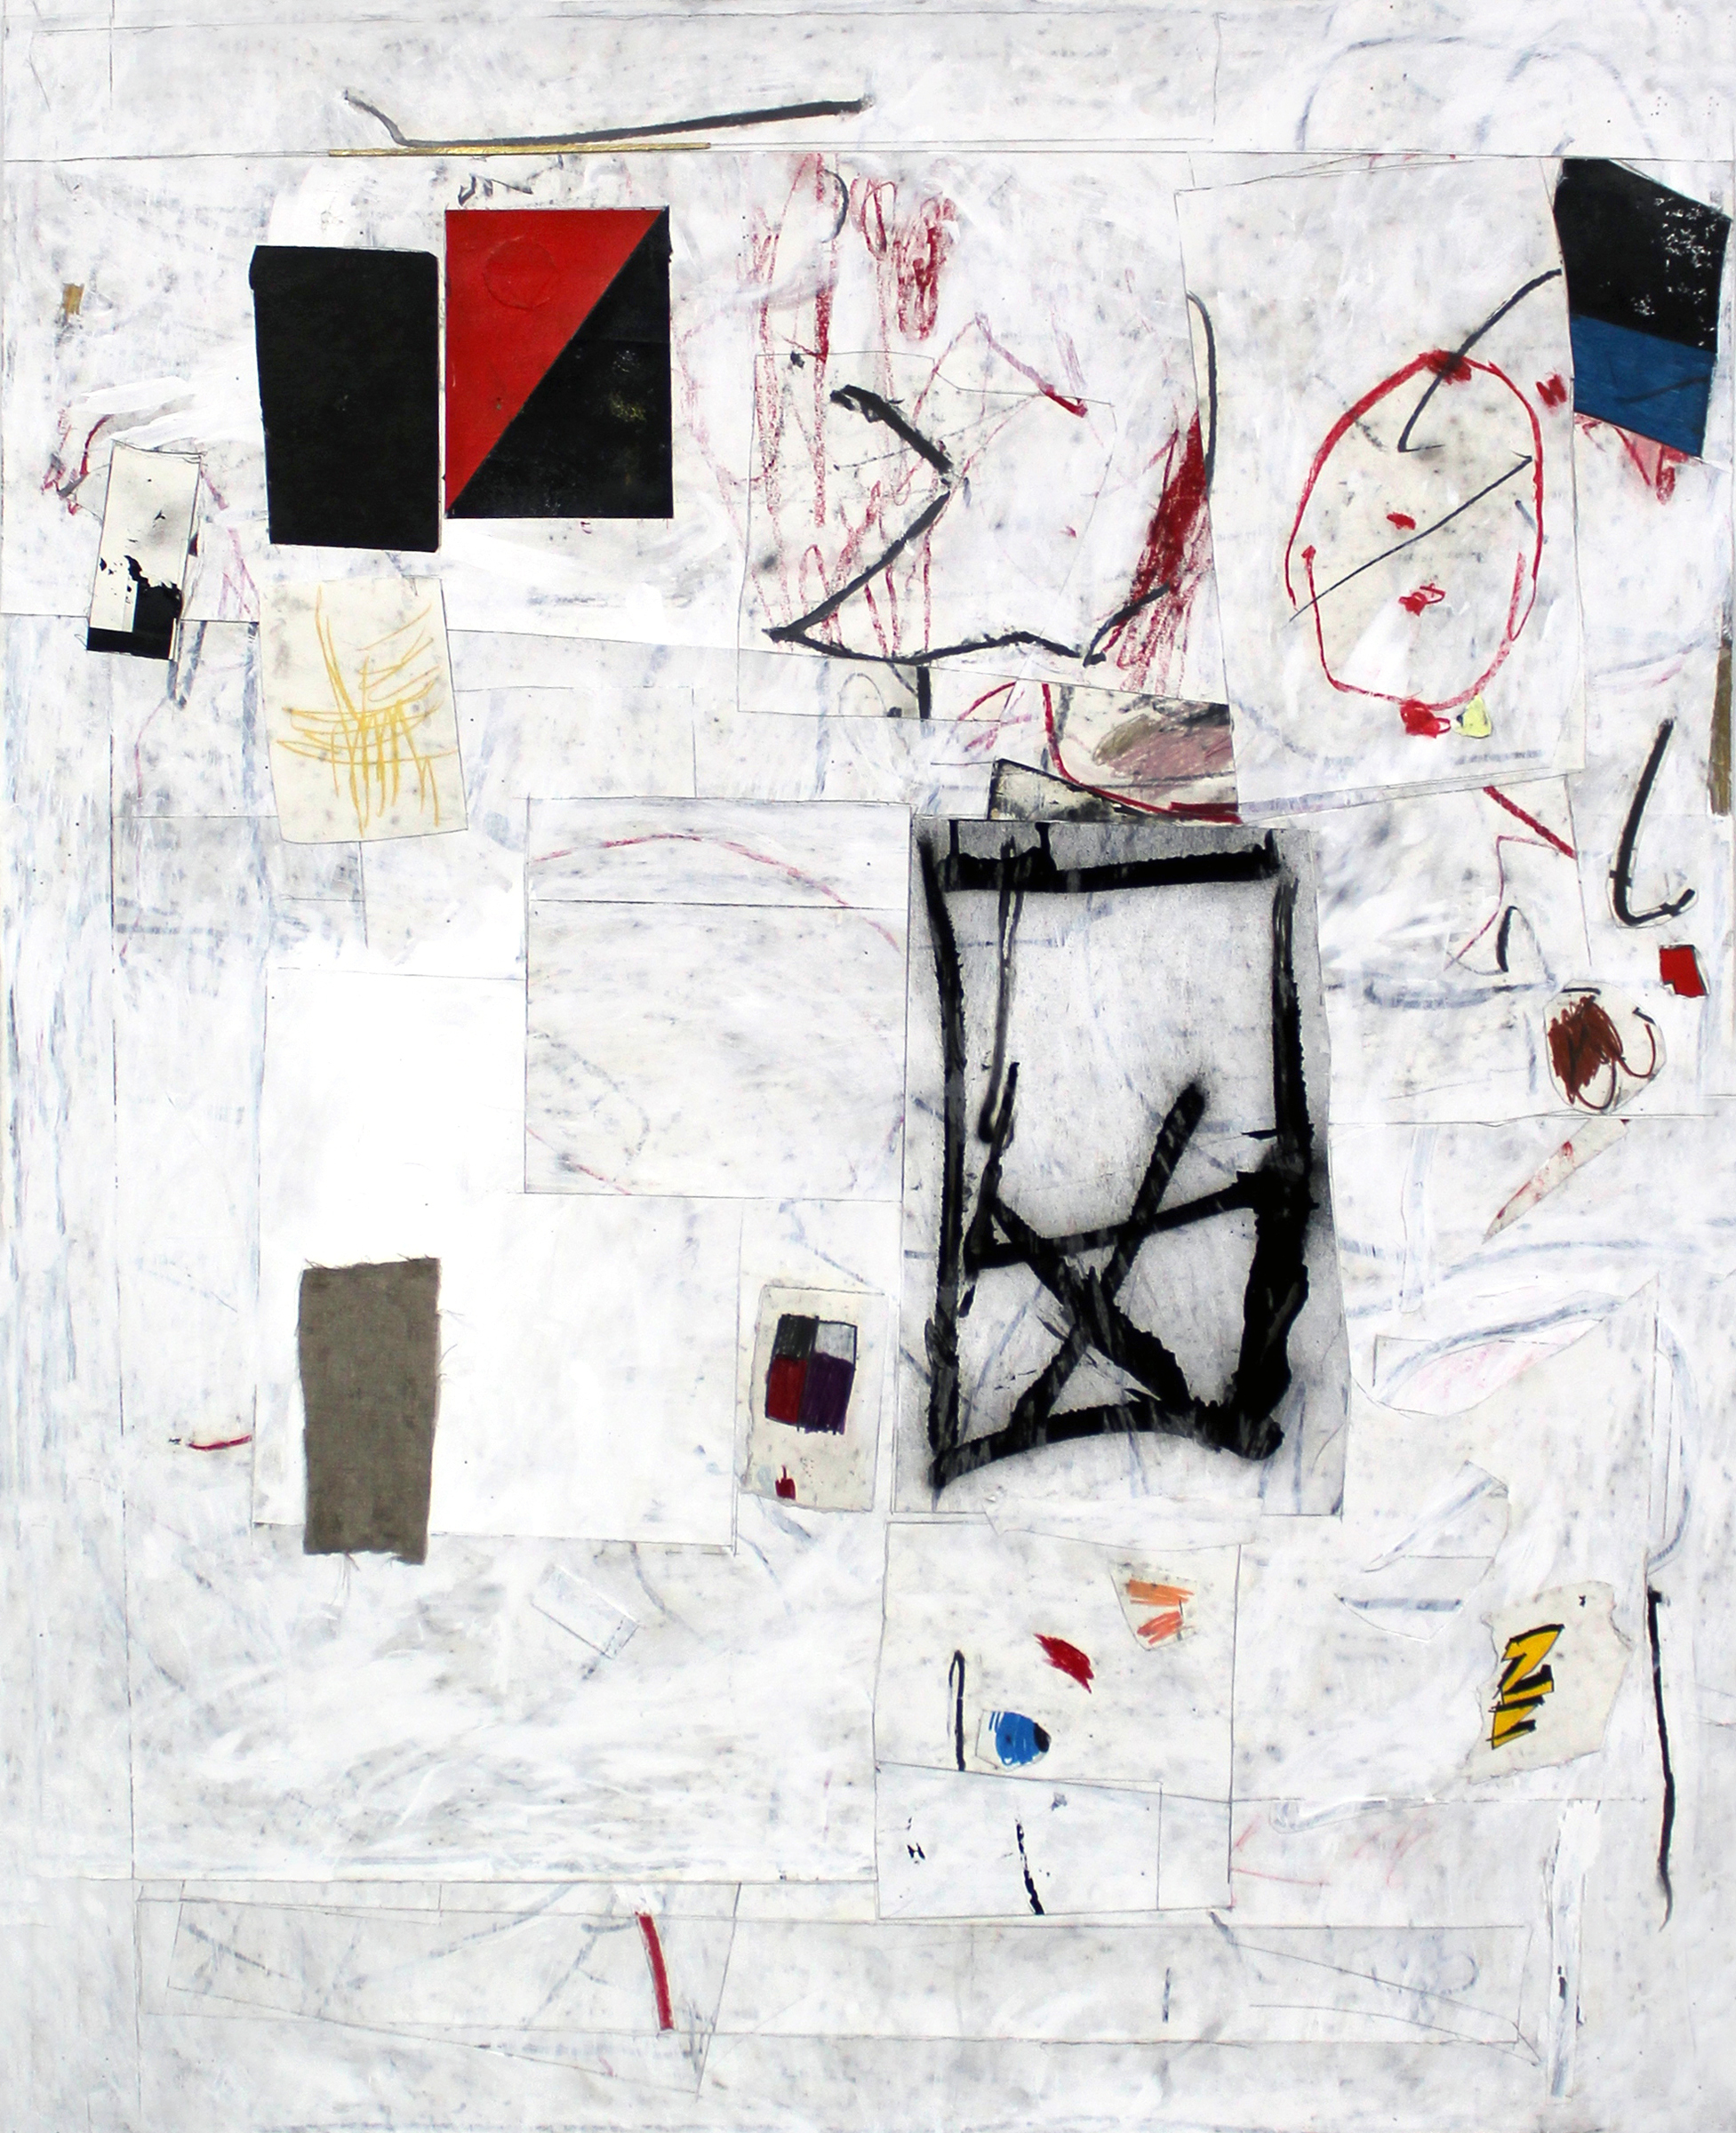   JOSEPH HART   Untitled , collaged paper, acrylic, oil crayon and graphite on paper, 44" x 36" (framed), 2013 